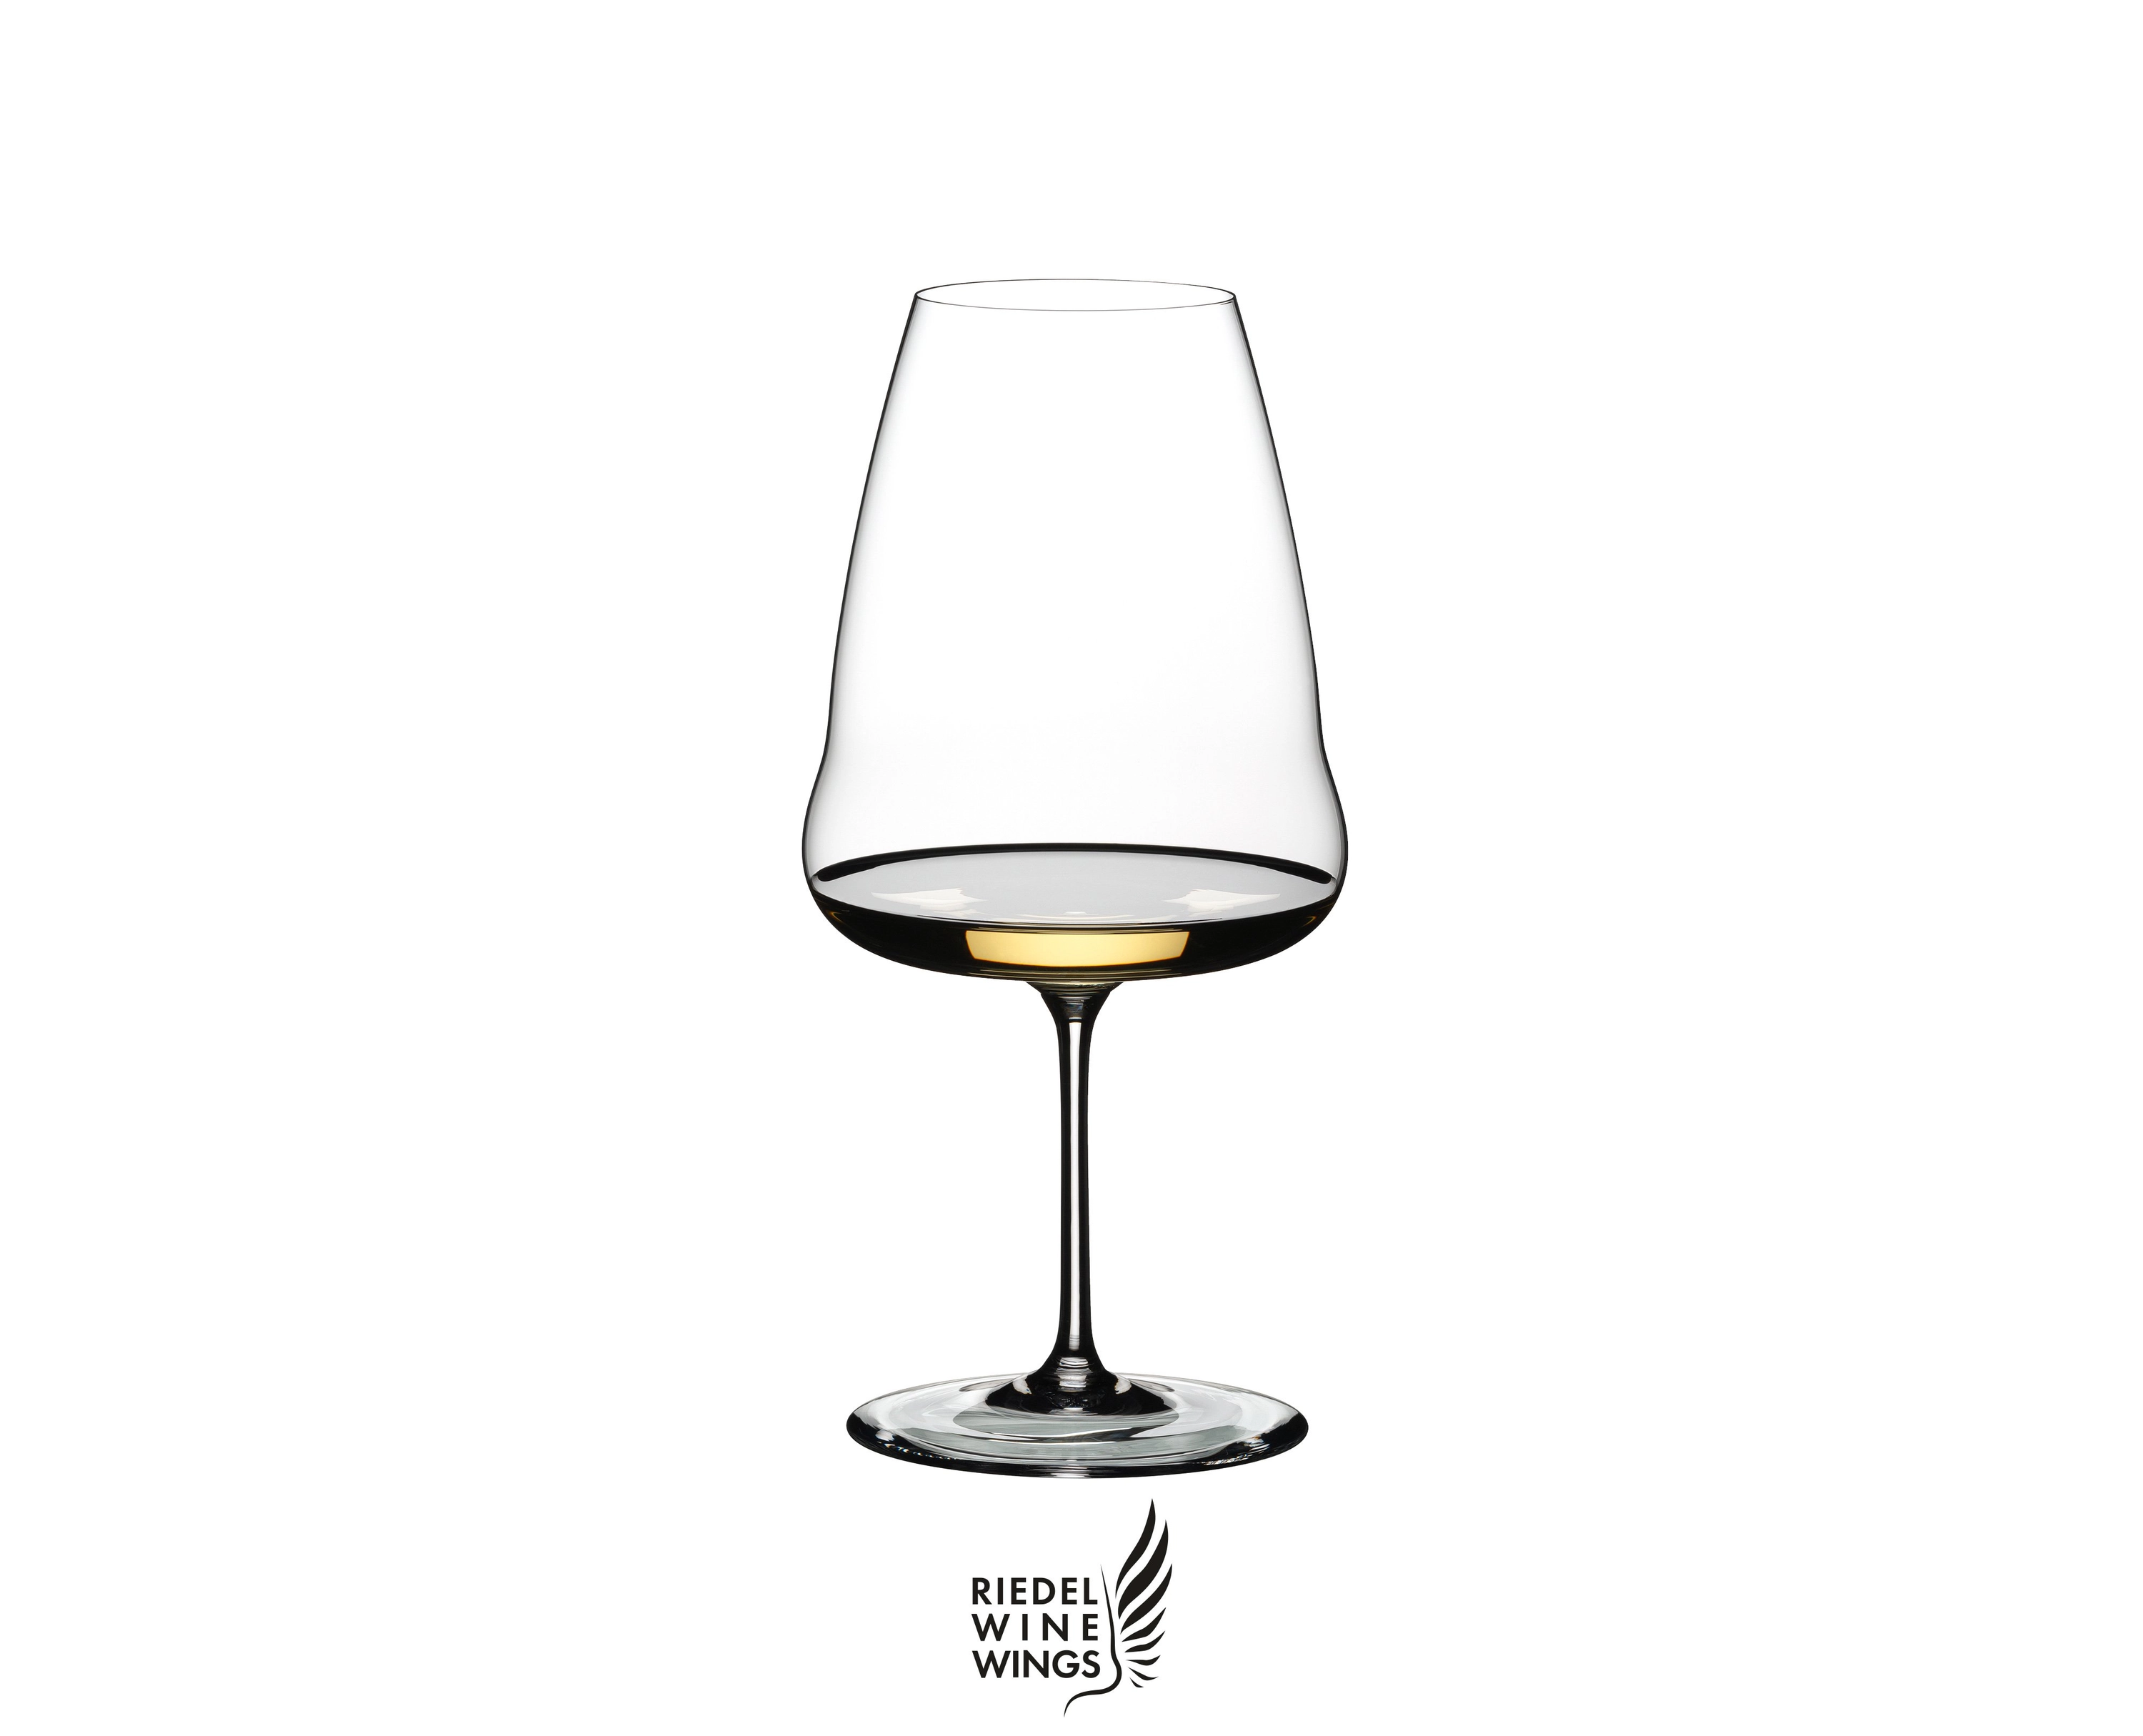 Riedel Winewings Riesling, confezione singola